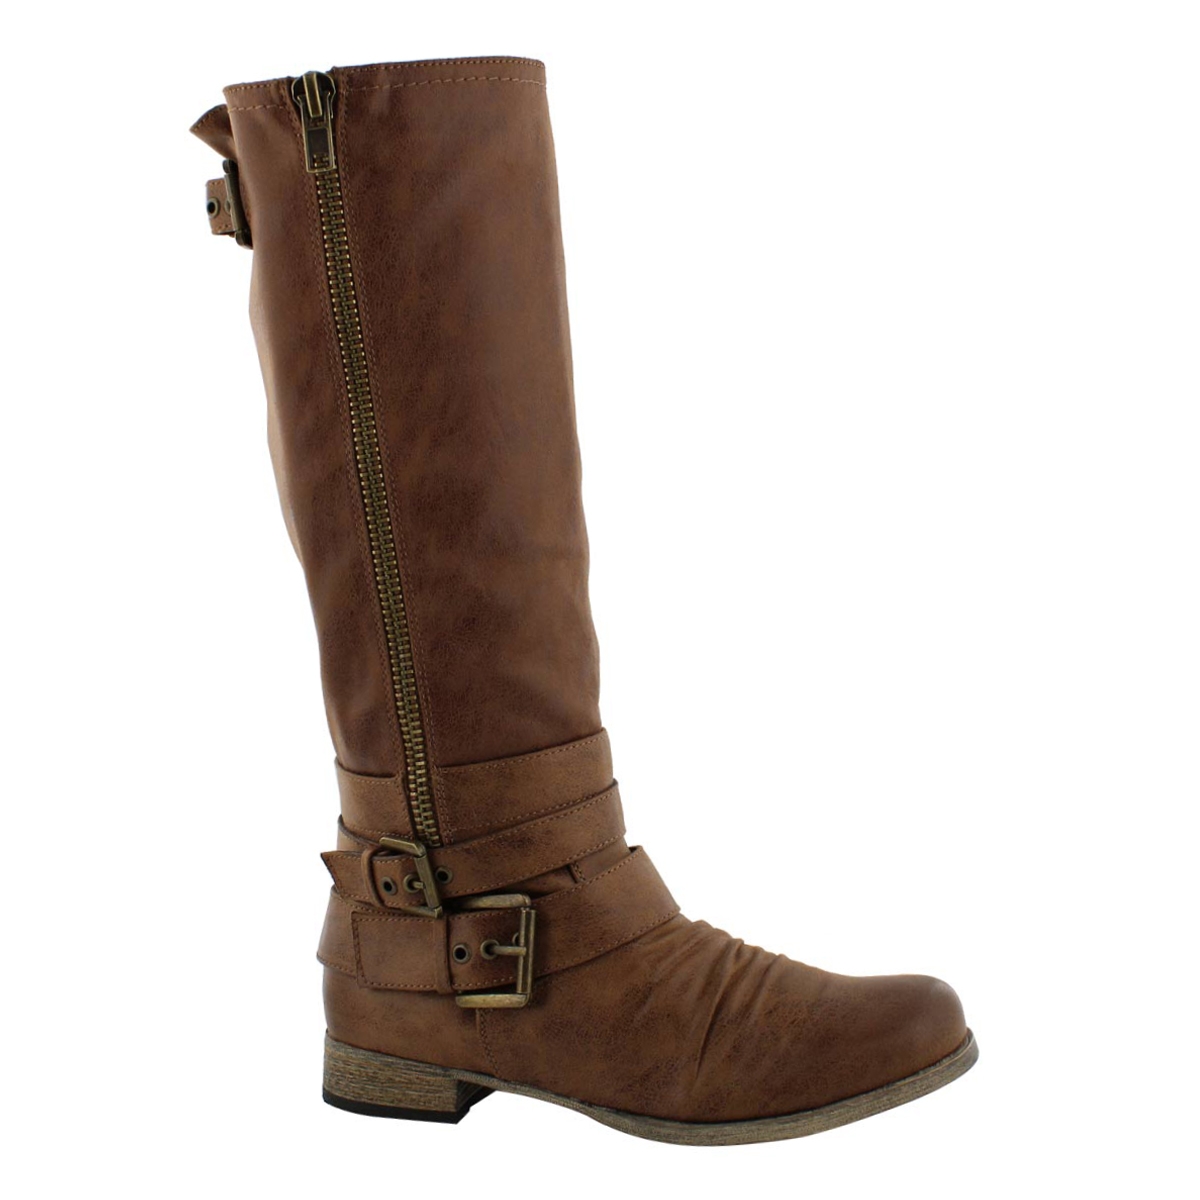 TRISS brown riding boots | SoftMoc USA